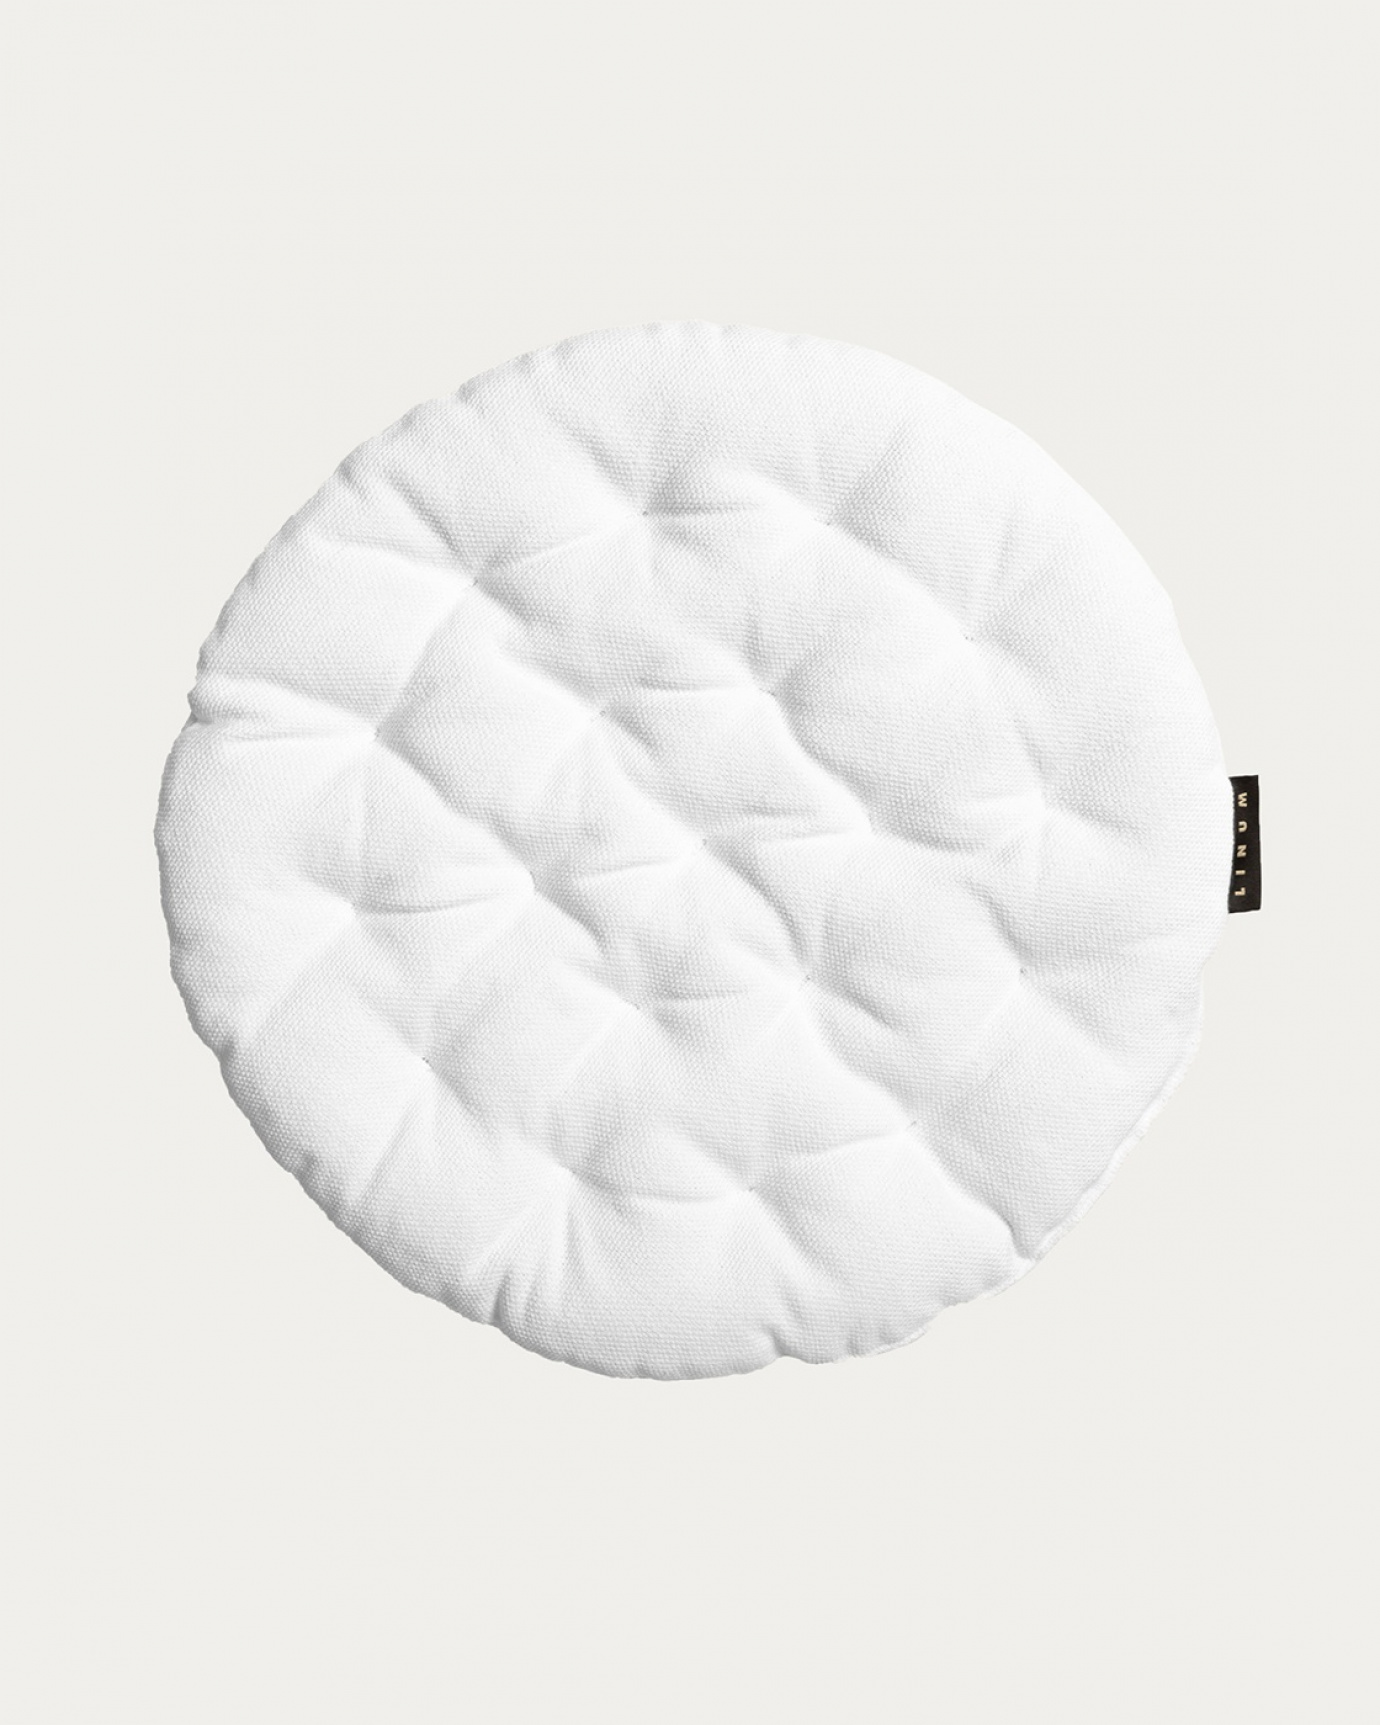 Product image white PEPPER seat cushion made of soft cotton with recycled polyester filling from LINUM DESIGN. Size ø37 cm.